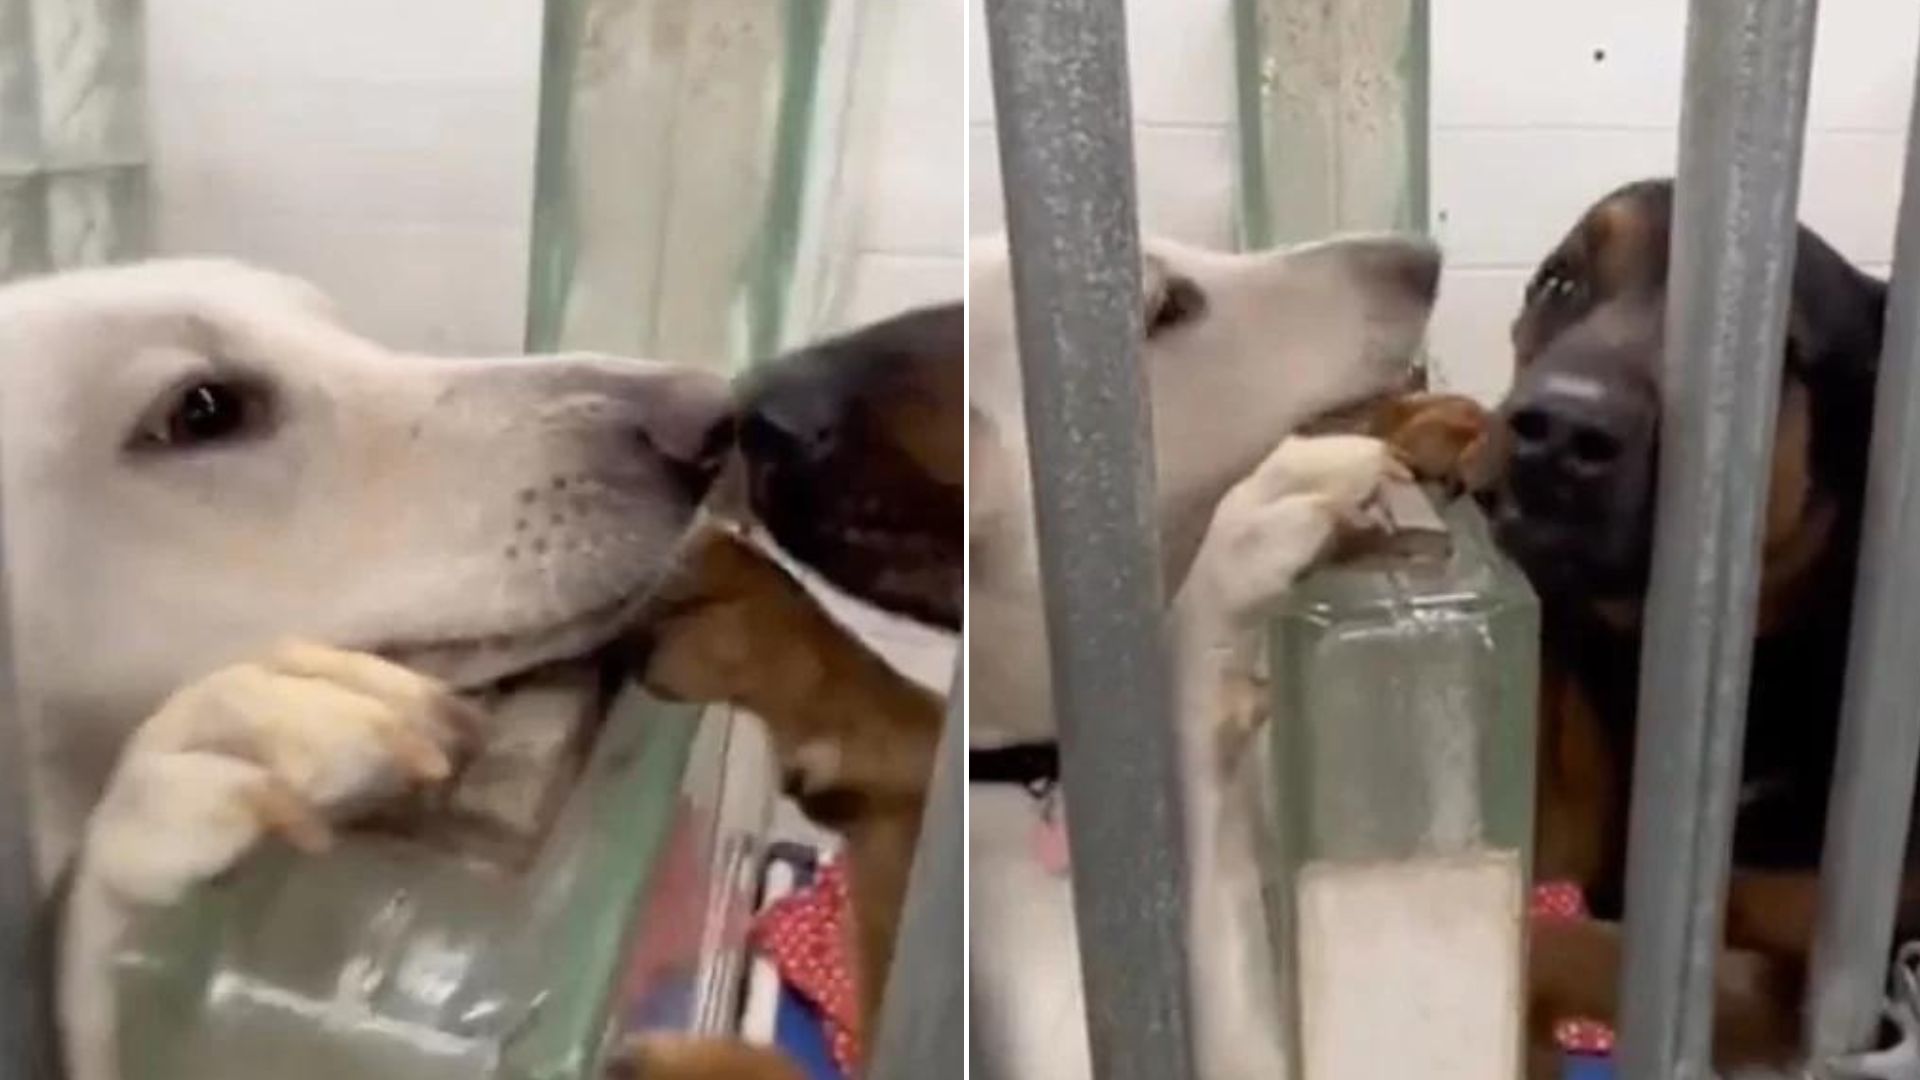 Adorable Shelter Dog Has The Sweetest Way Of Comforting Her Buddy Next Door